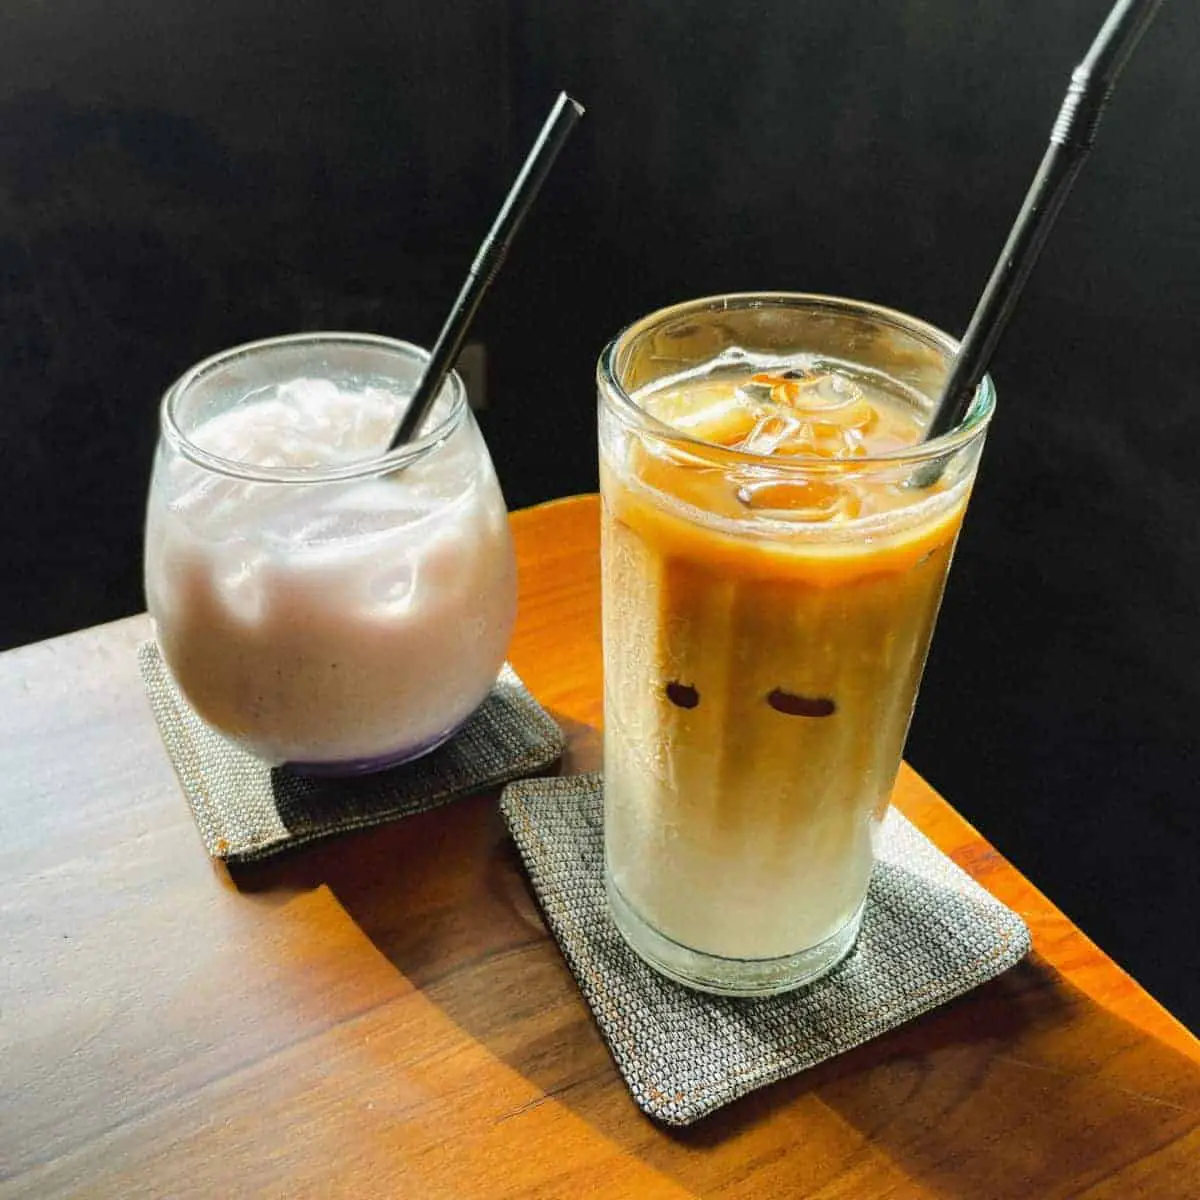 Taro latte and iced latte at Dia Coffee